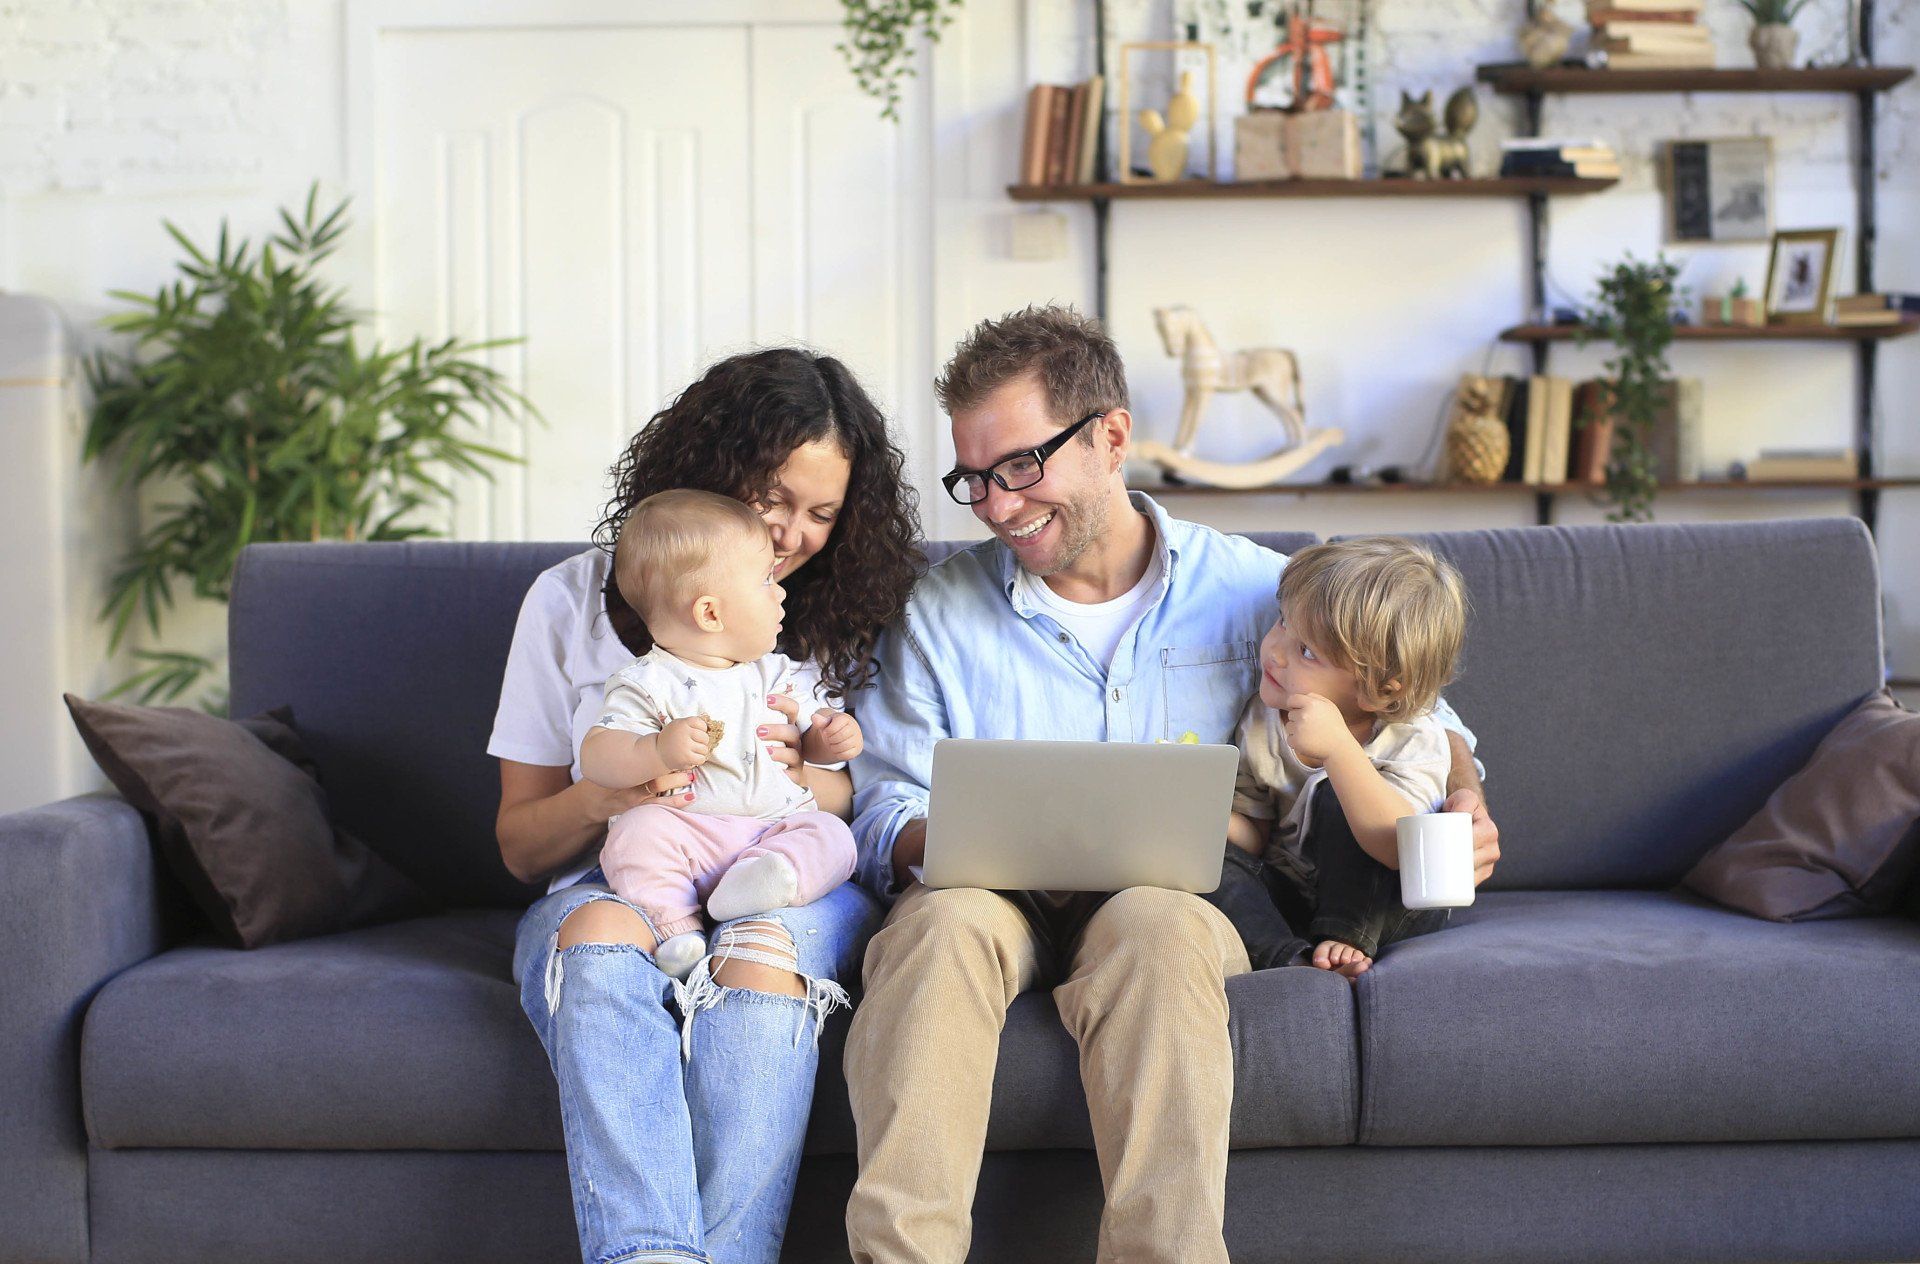 man and woman on the sofa with their kids ages 0 to 3. Man has laptop on his lap booking an appointment.